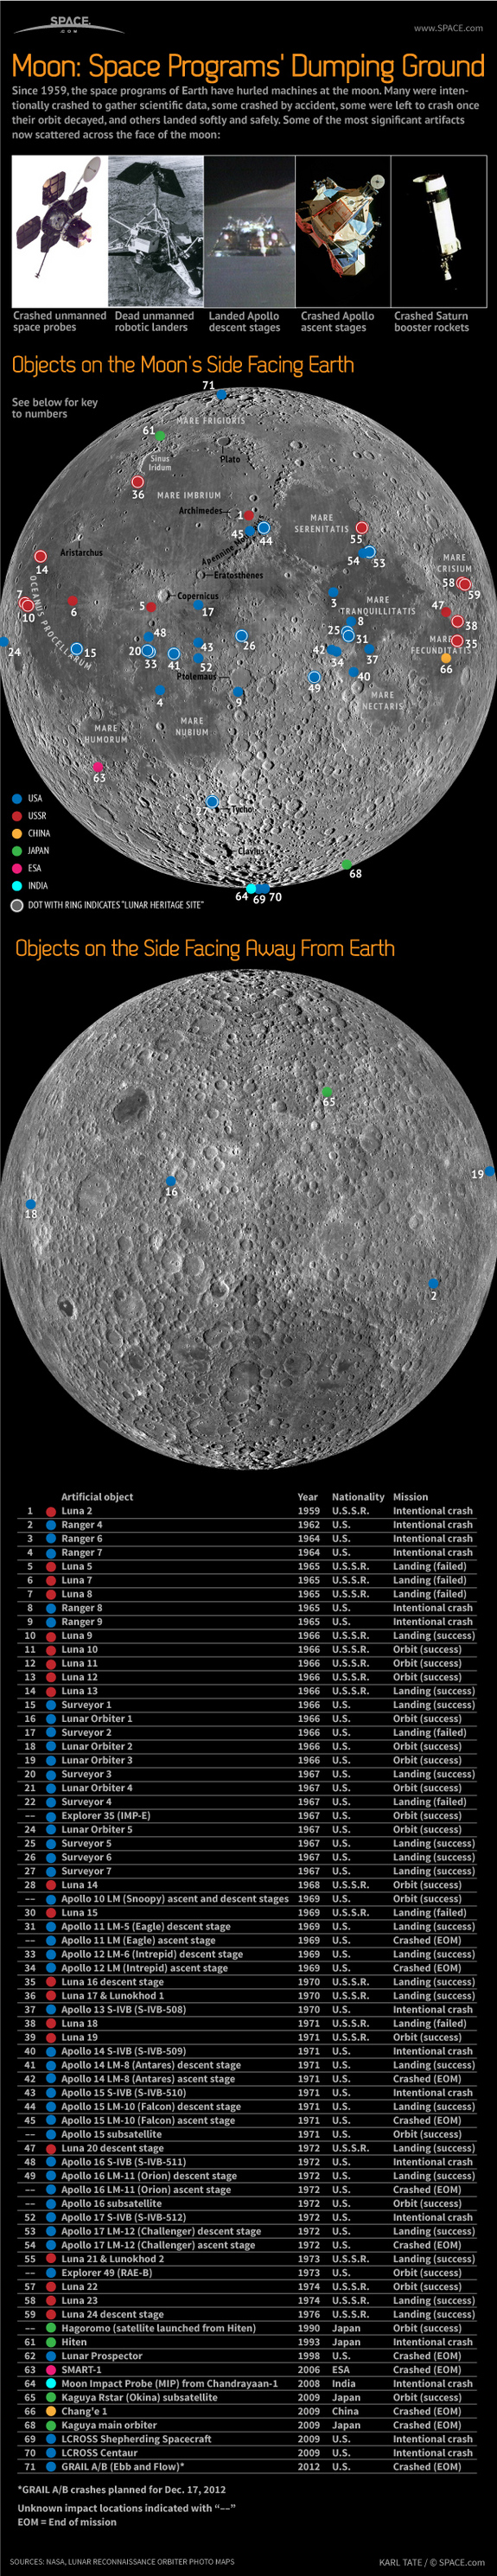 Learn about the dozens of dead space vehicles that litter the surface of the moon, in this SPACE.com infographic.